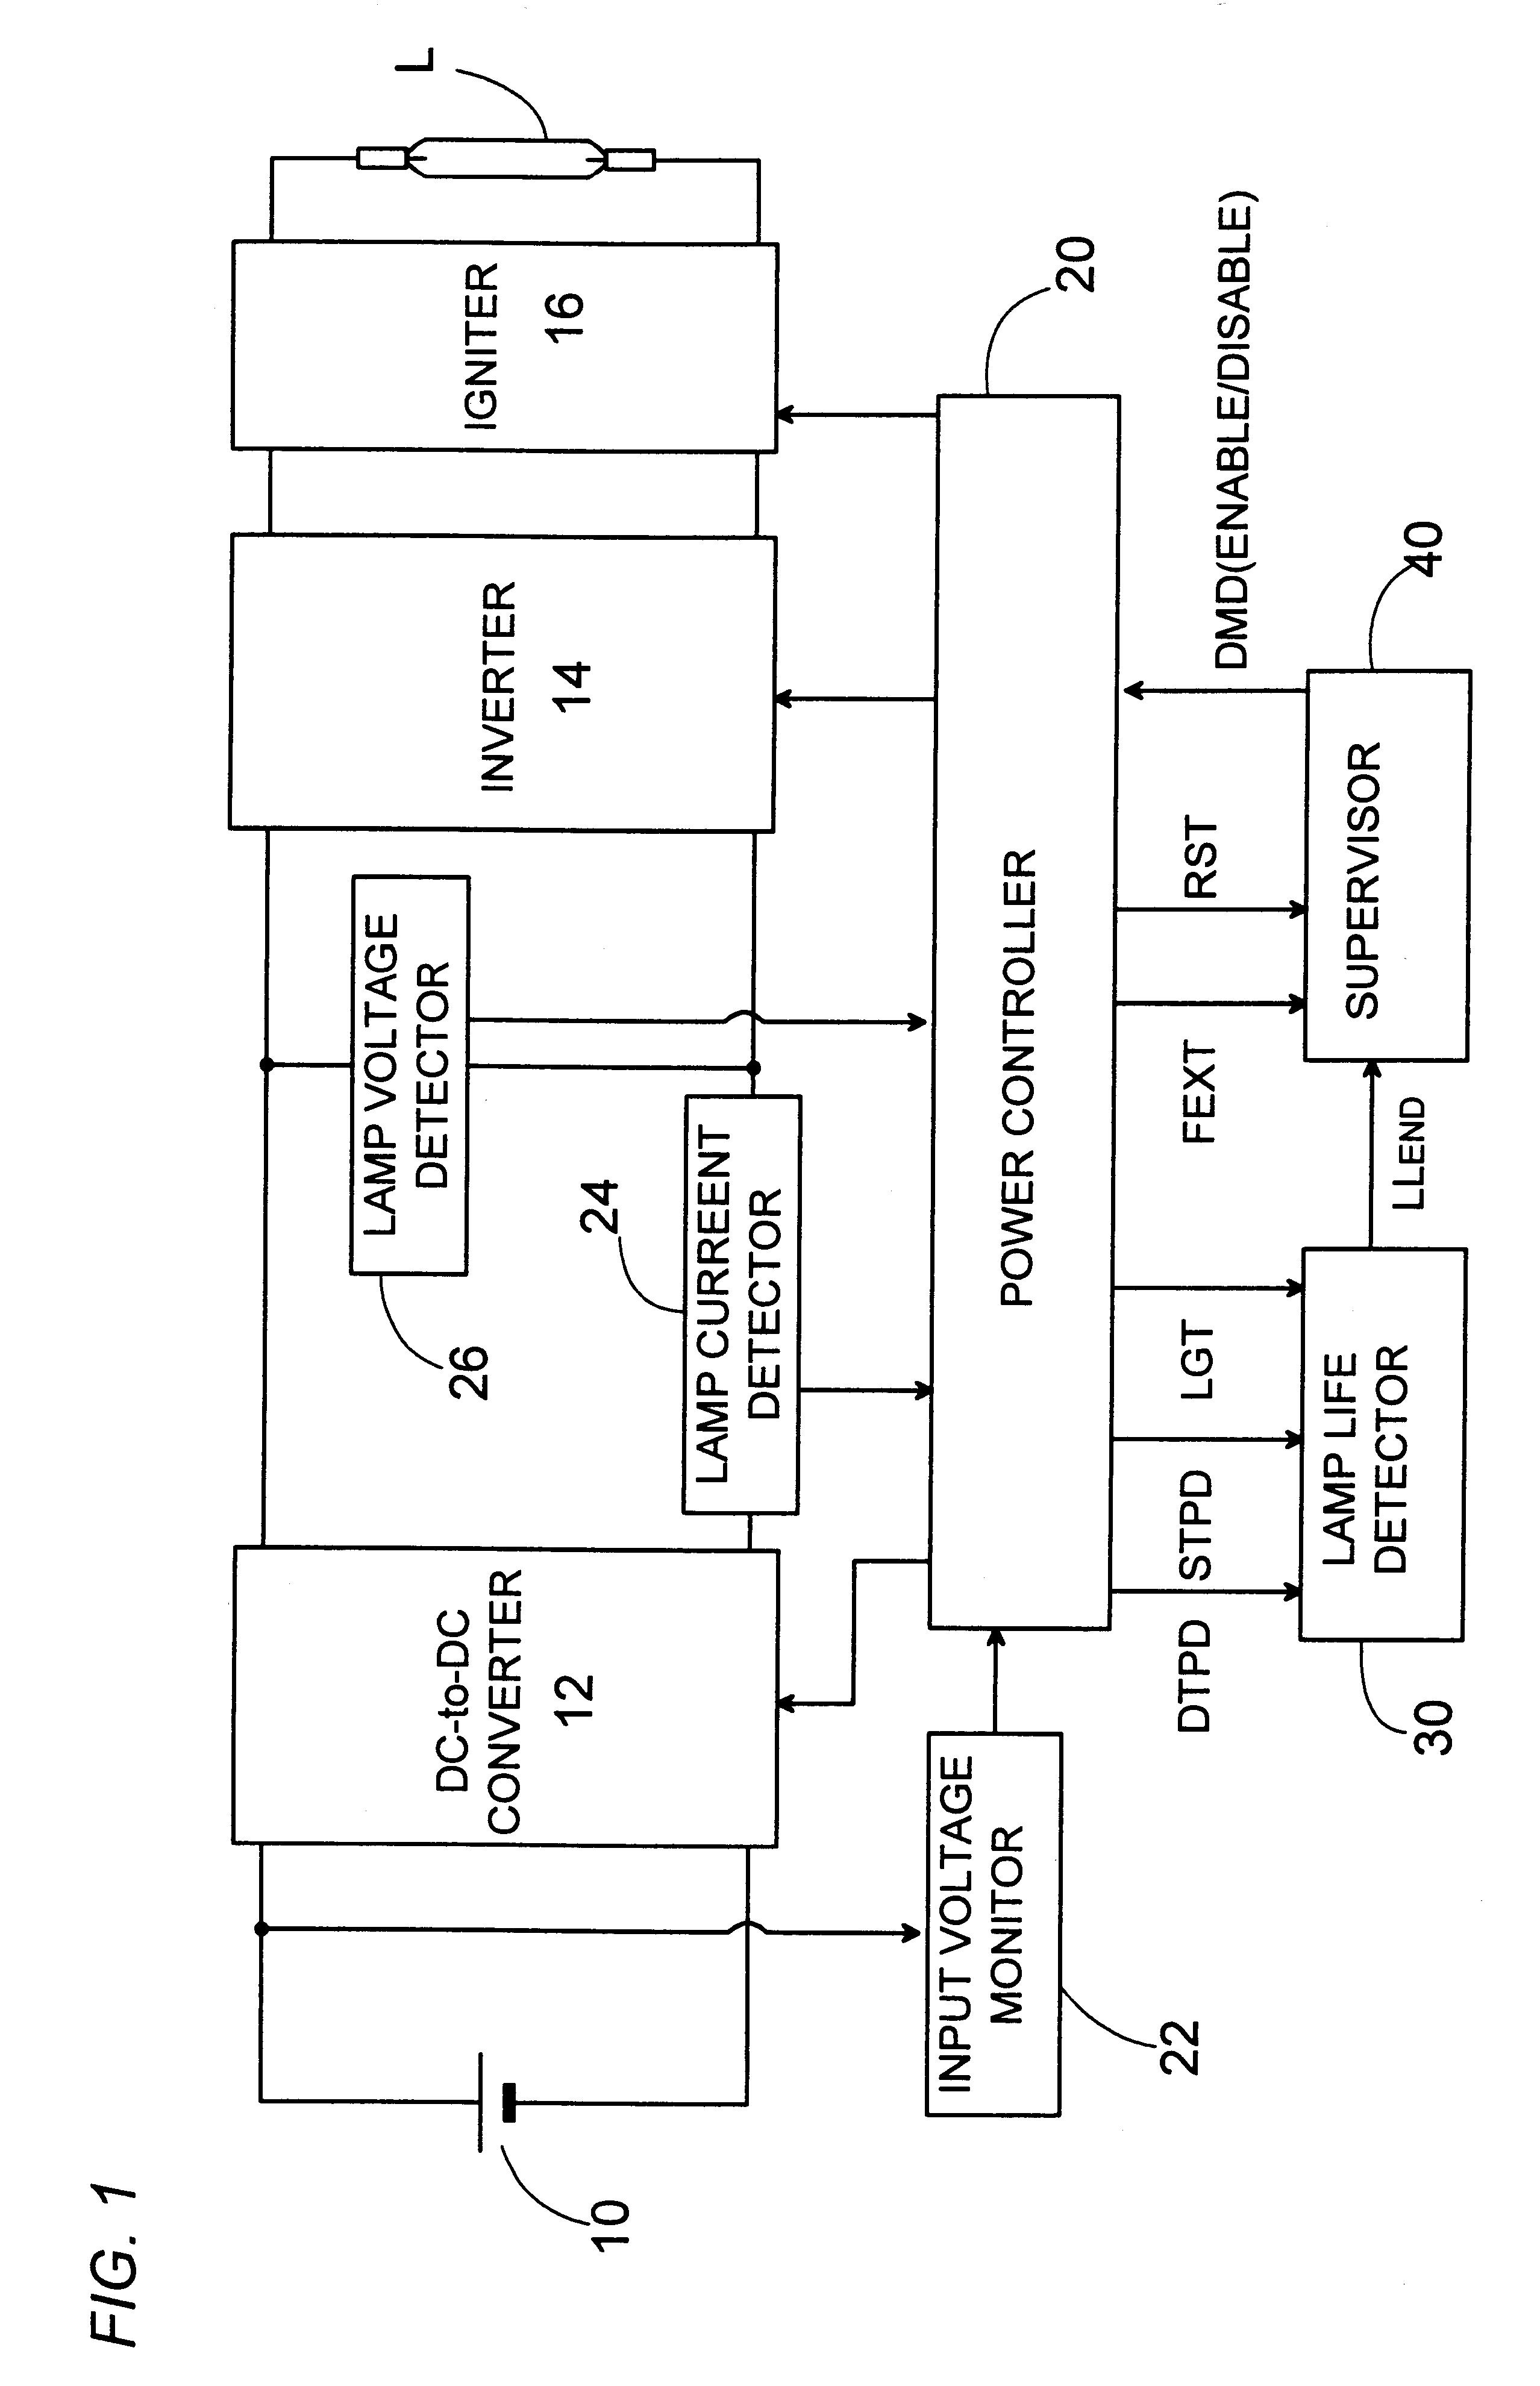 Ballast for a discharge lamp with false deactivation detection